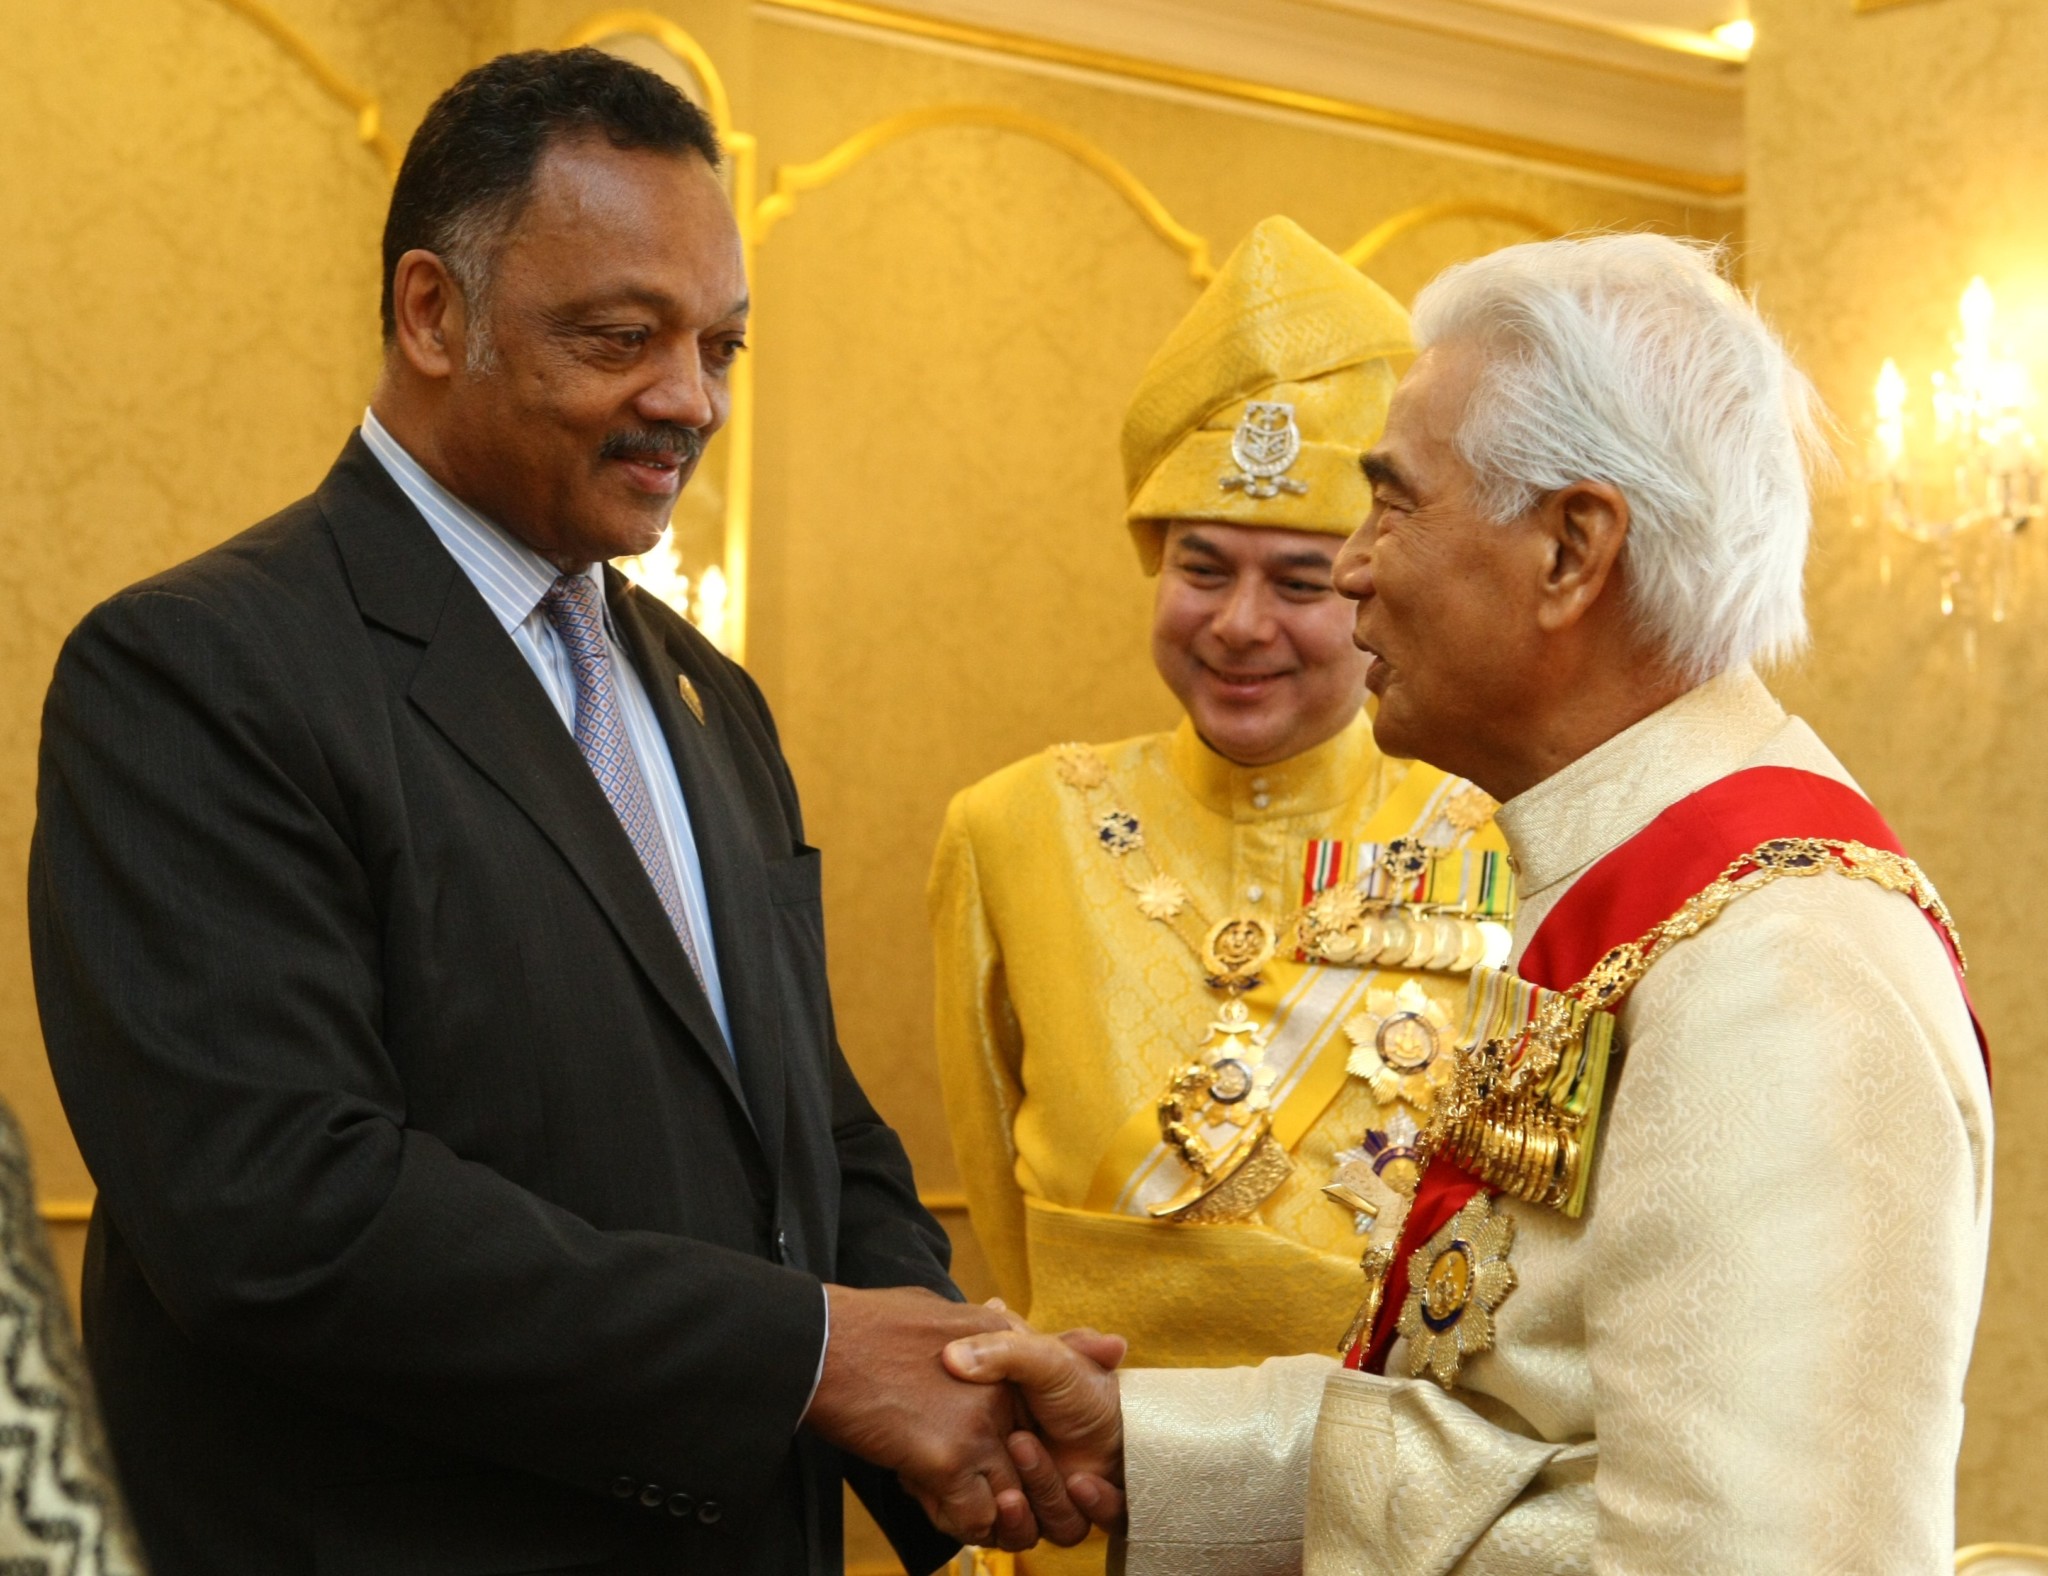 Rev. Jesse L. Jackson with HRH Sultan Azlan Shah, Sultan of the State of Perak and former Yang di-Pertuan Agong and King of Malaysia